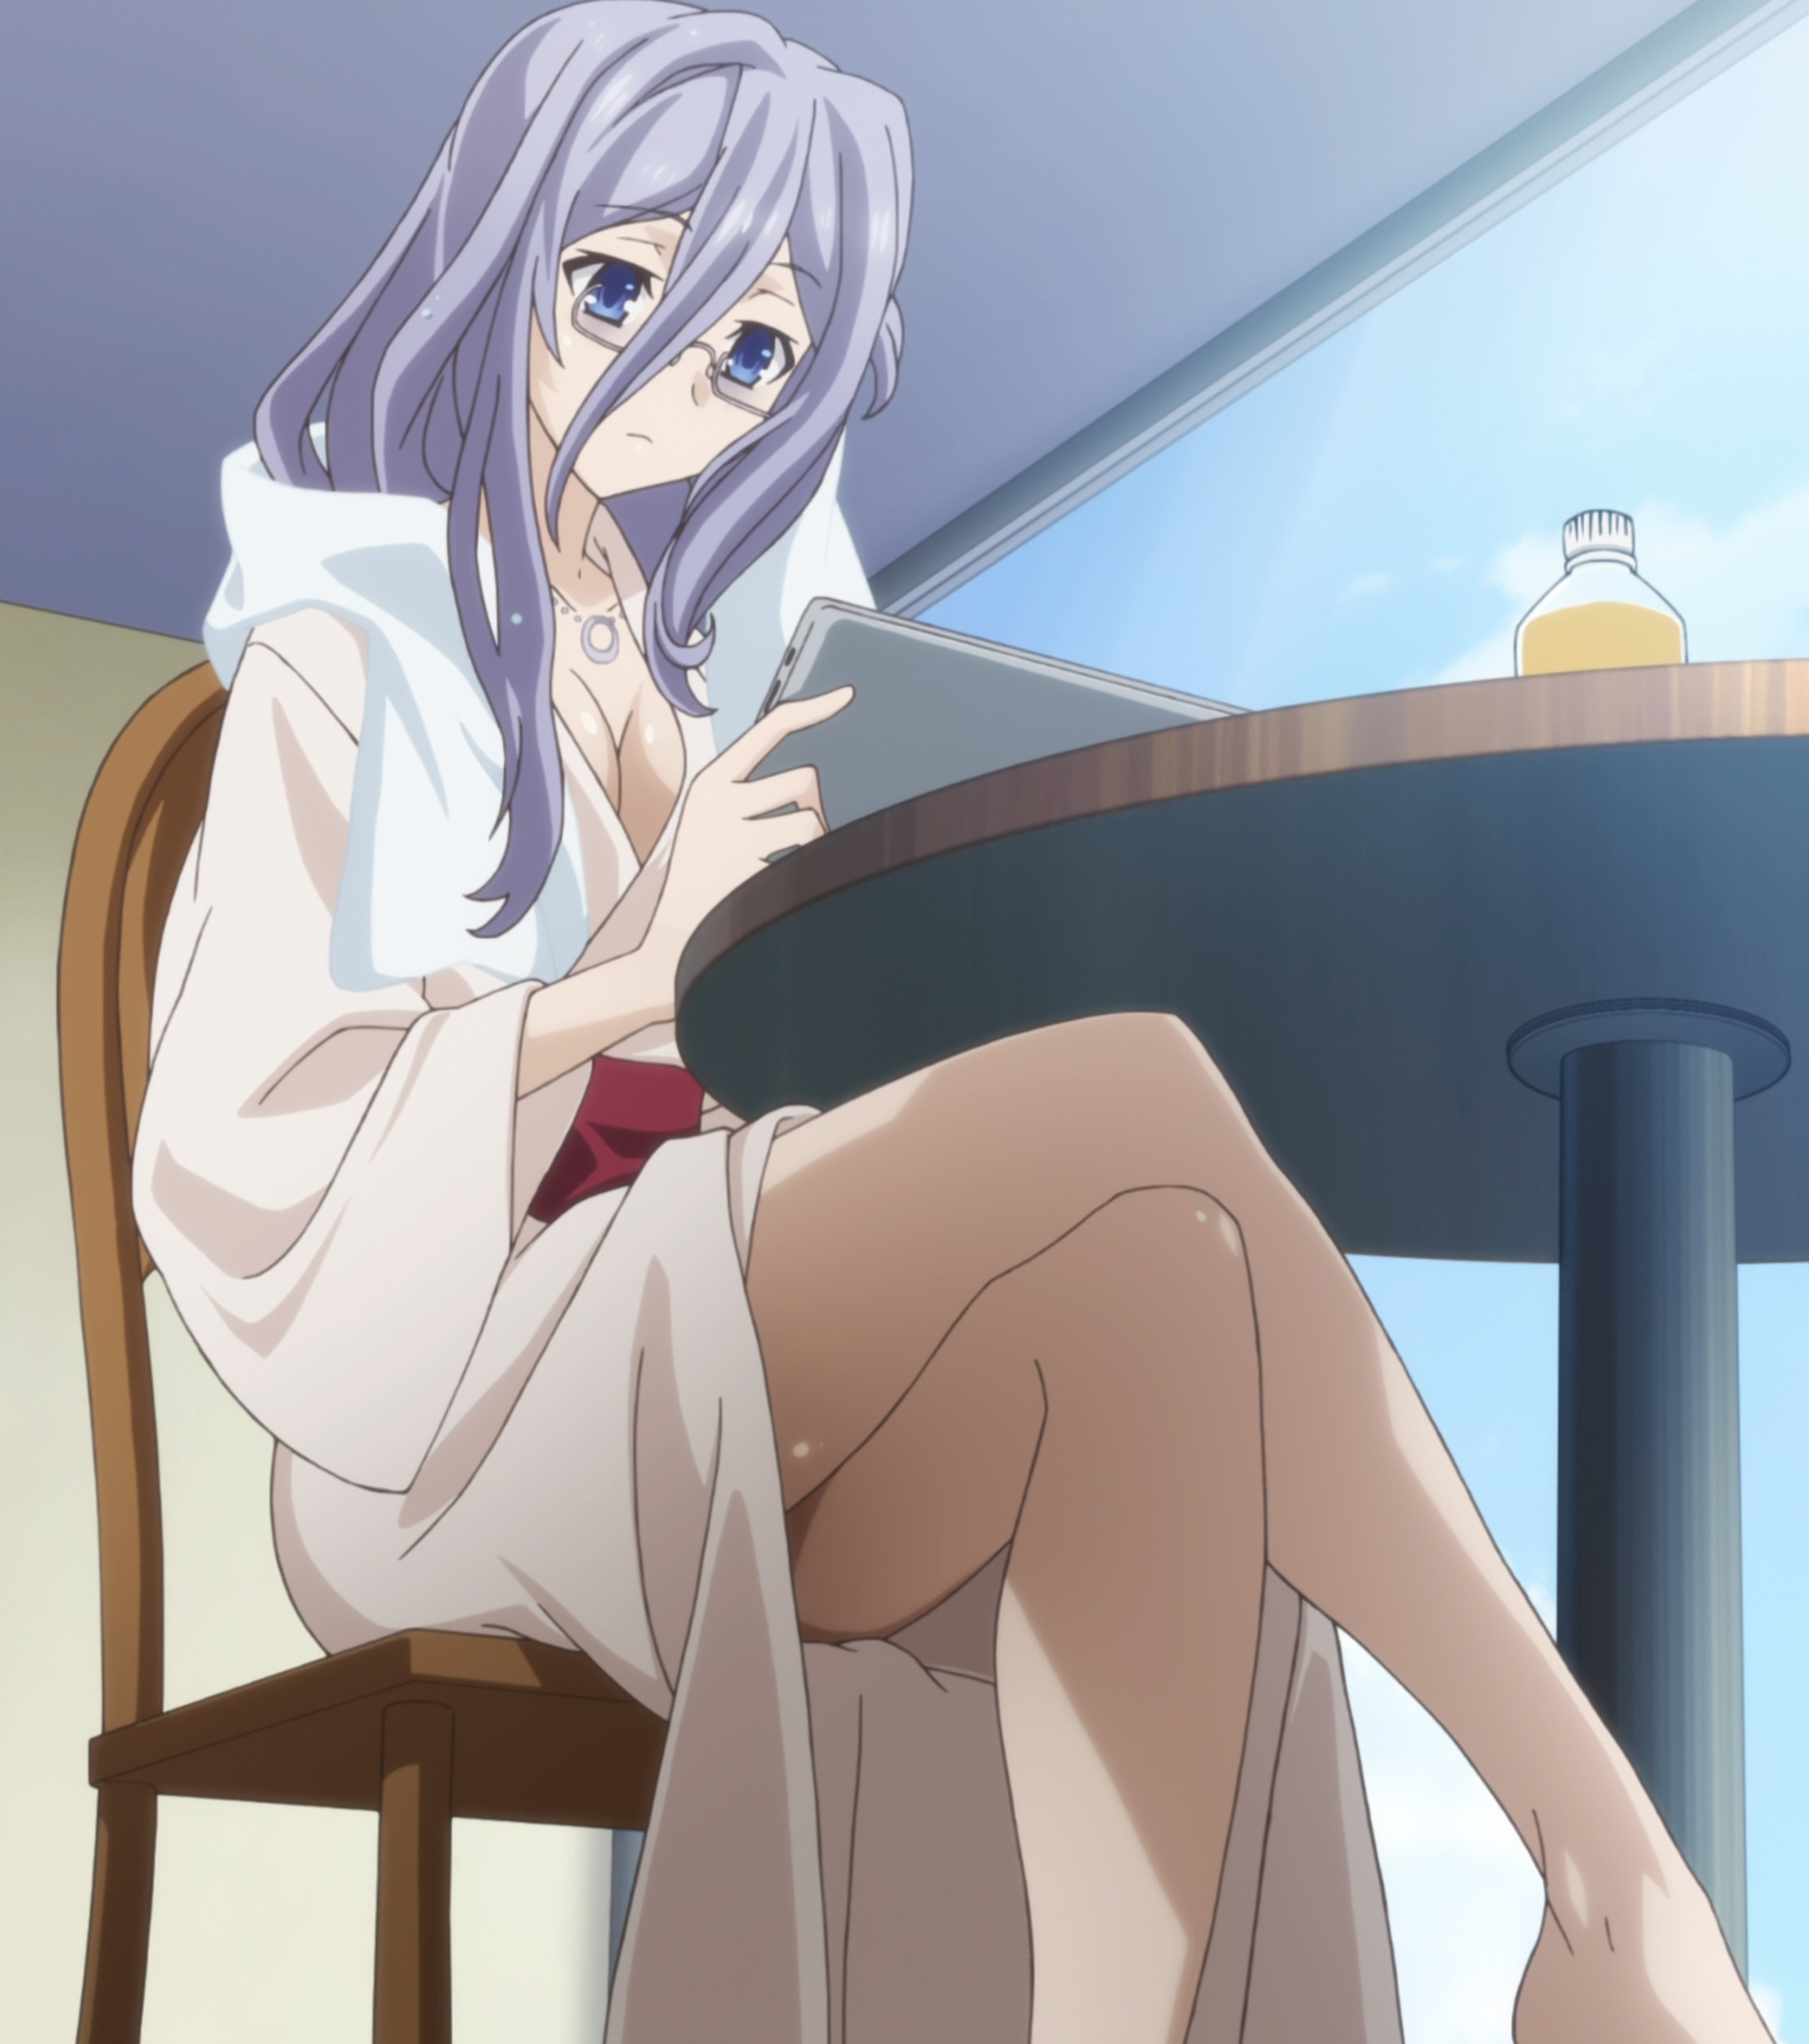 You won’t find any other episode within Date A Live with so much concentrat...